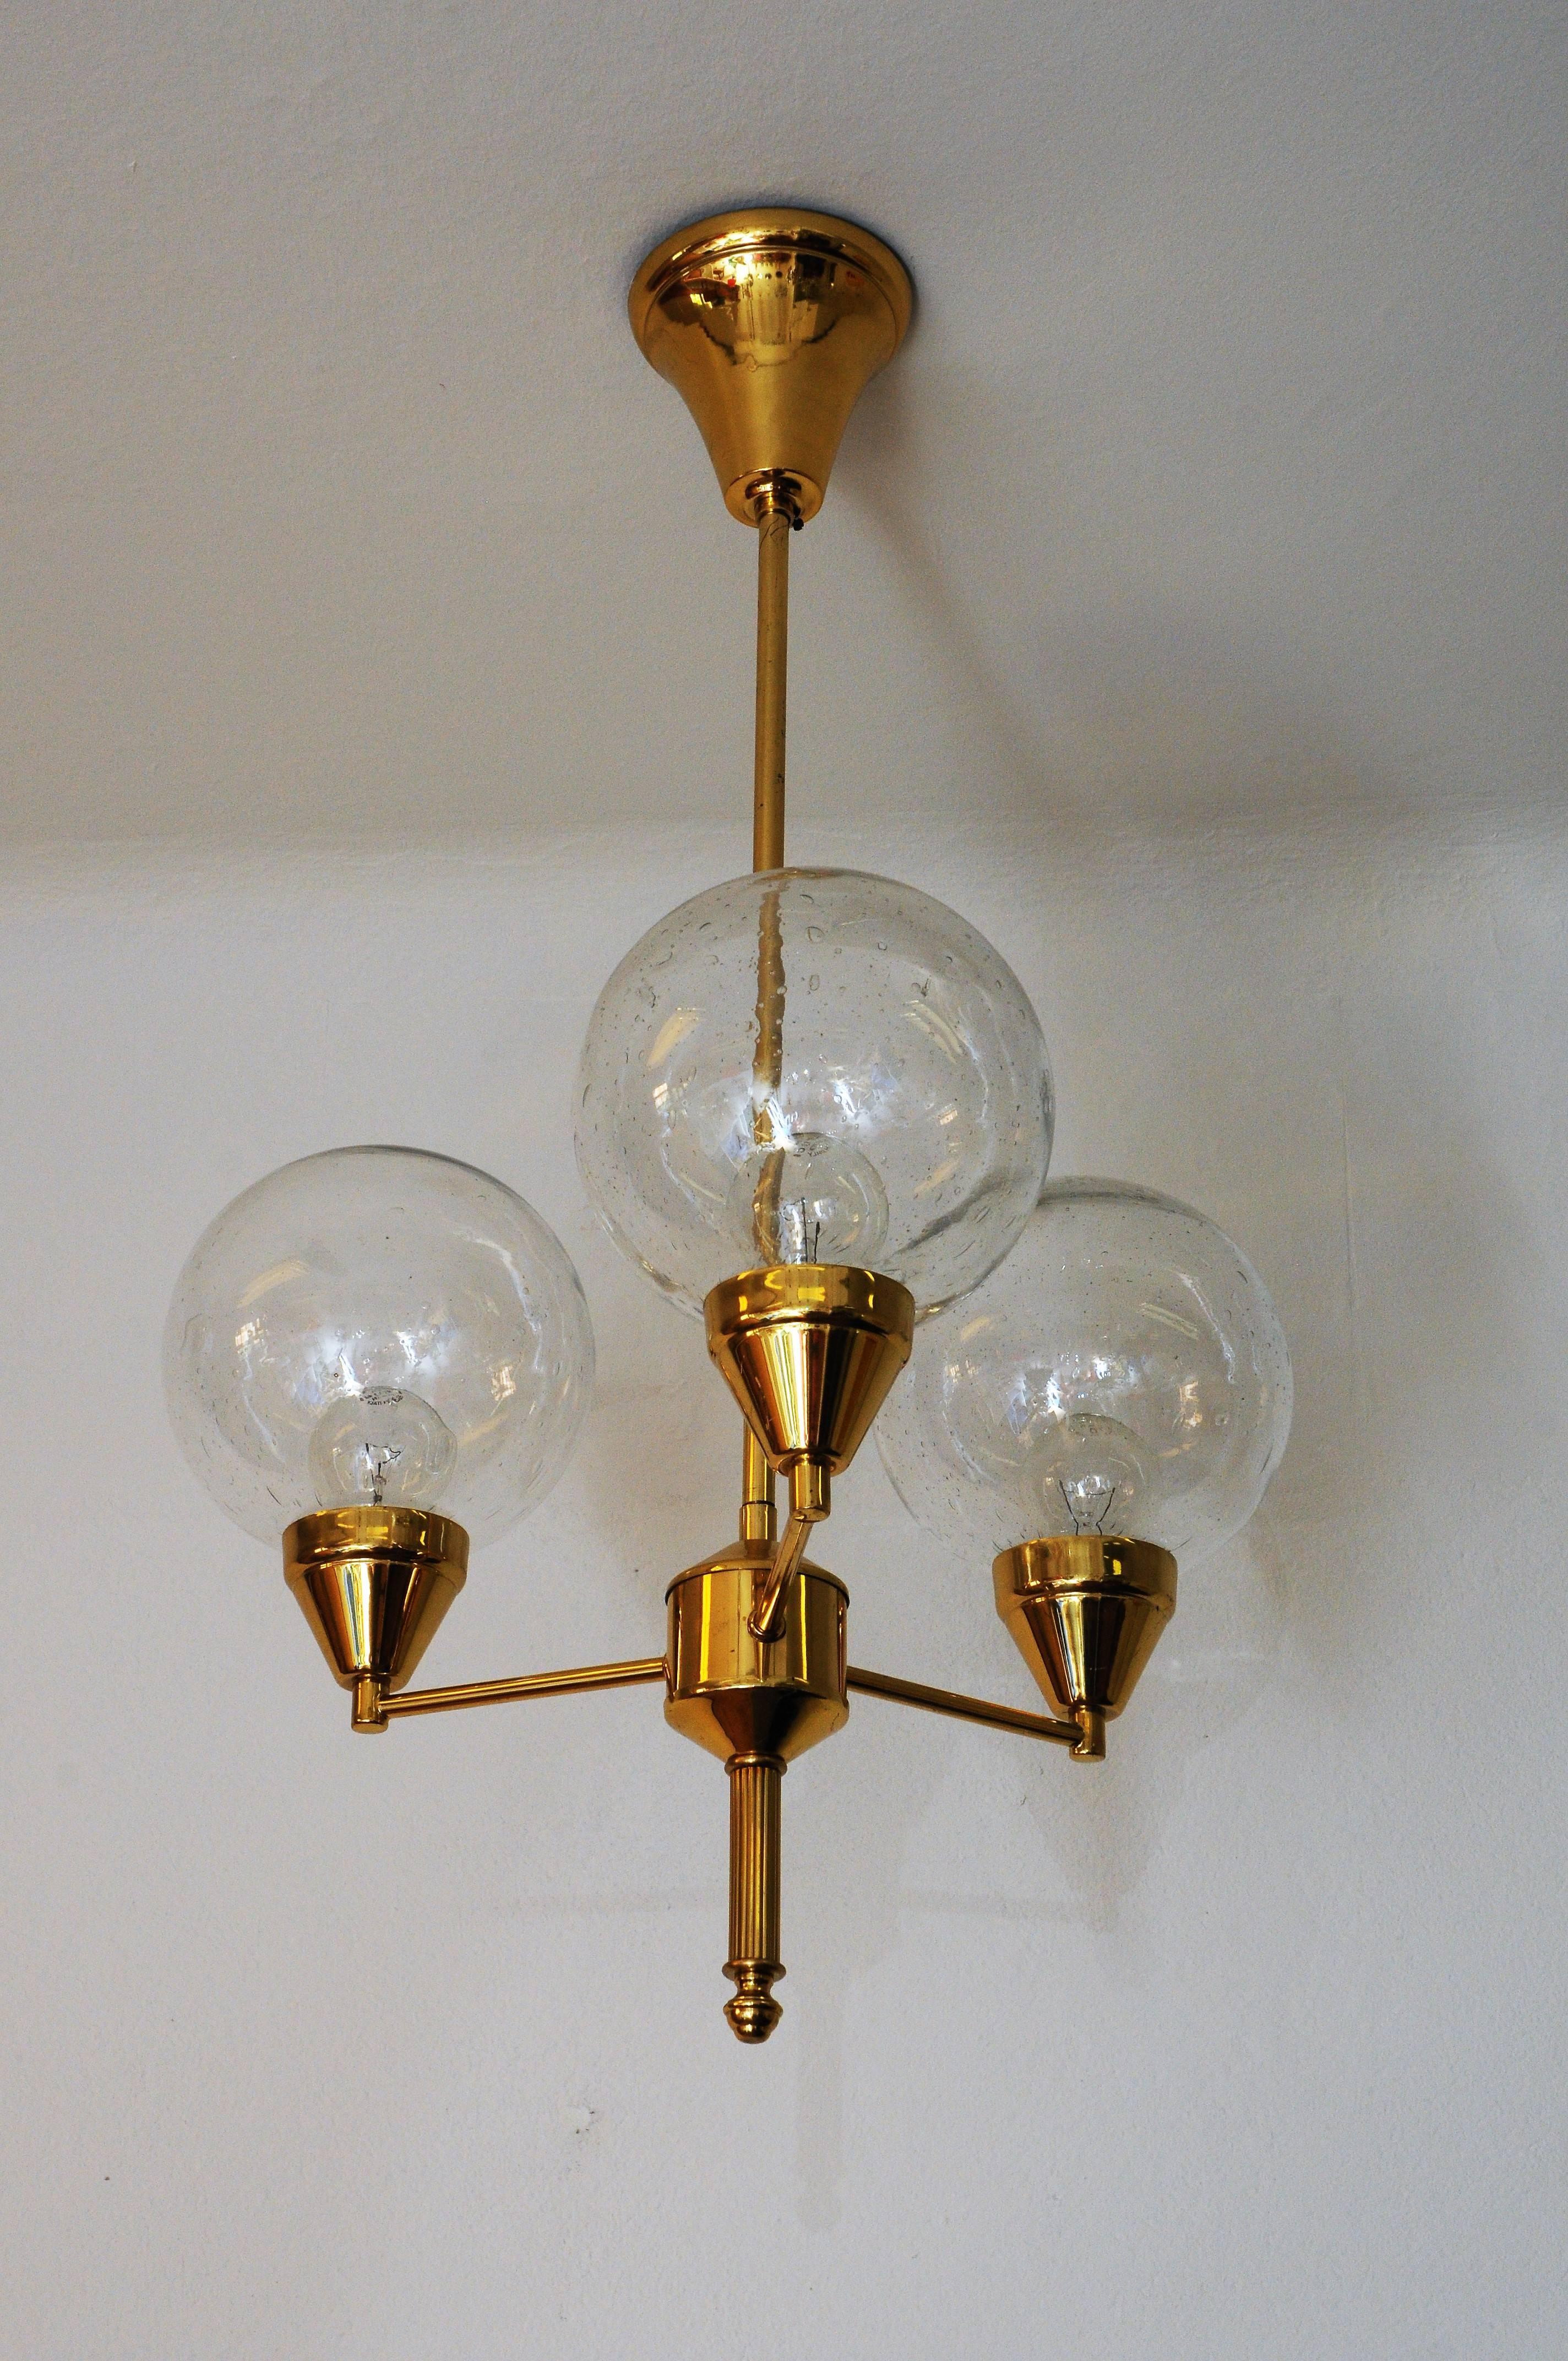 Midcentury Brass Ceiling Lamp with Three Clear Glass Domes 1960s, Sweden (Messing)